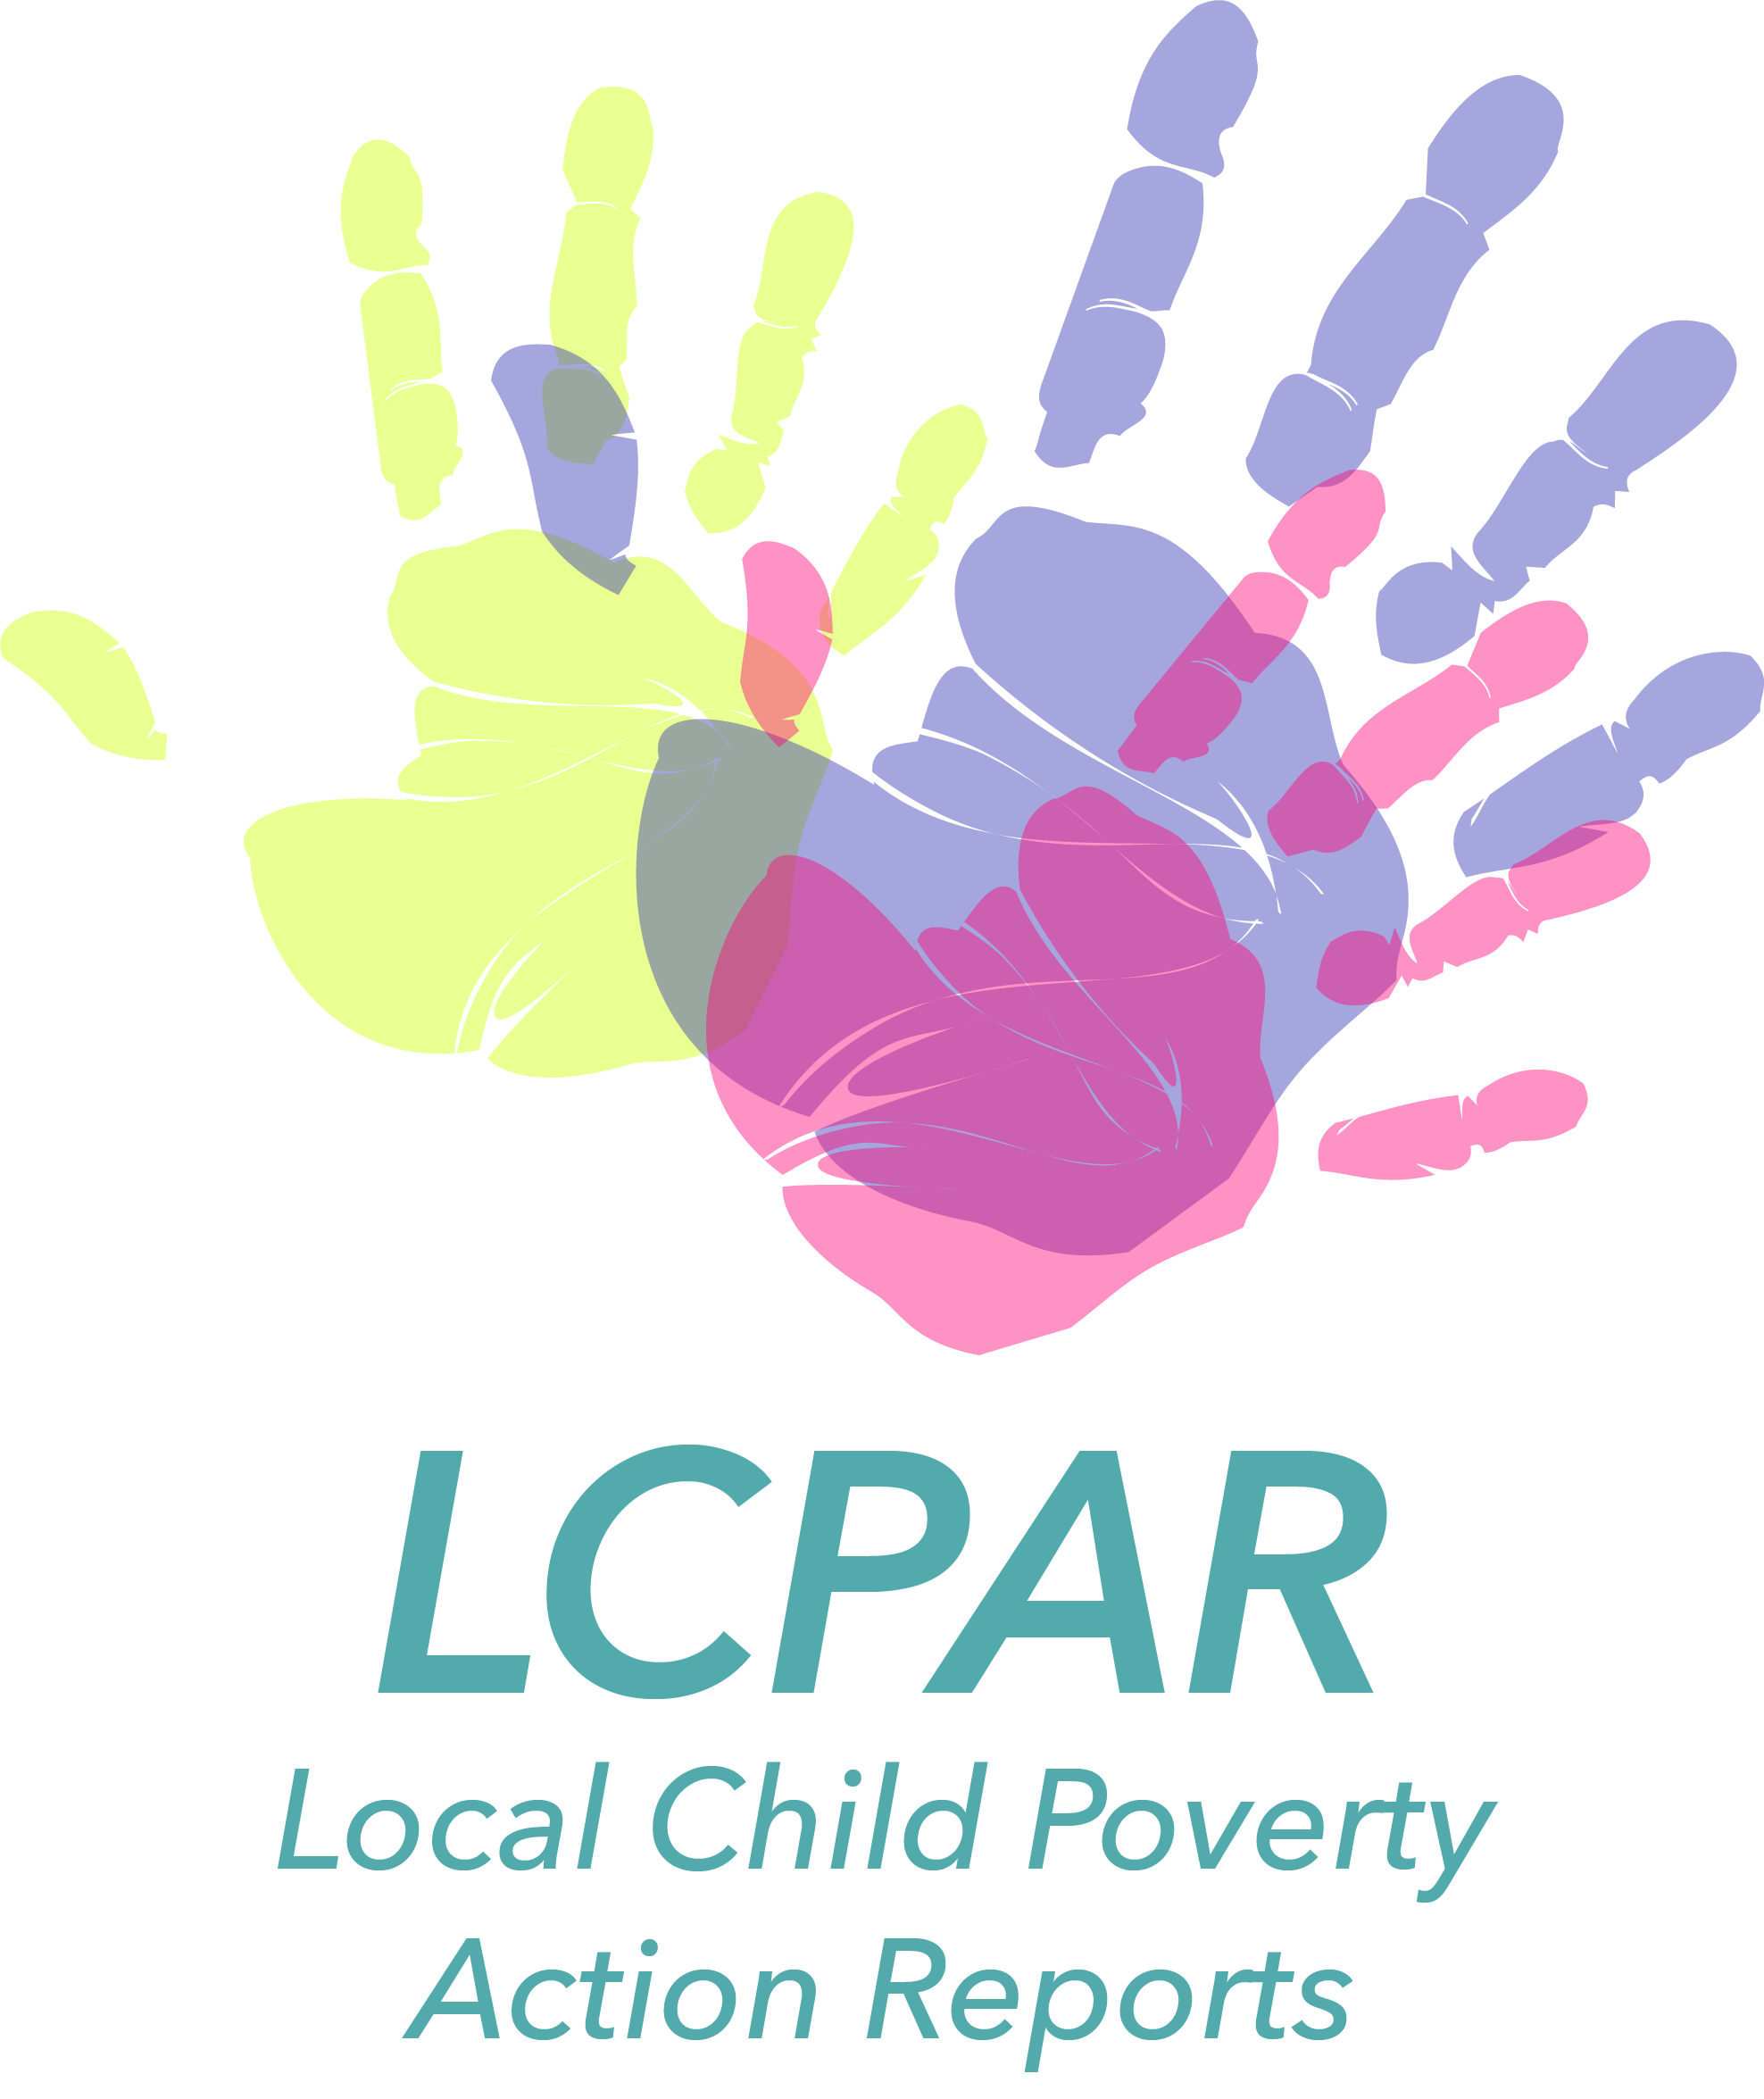 Taking Action on Child Poverty in Scotland Logo